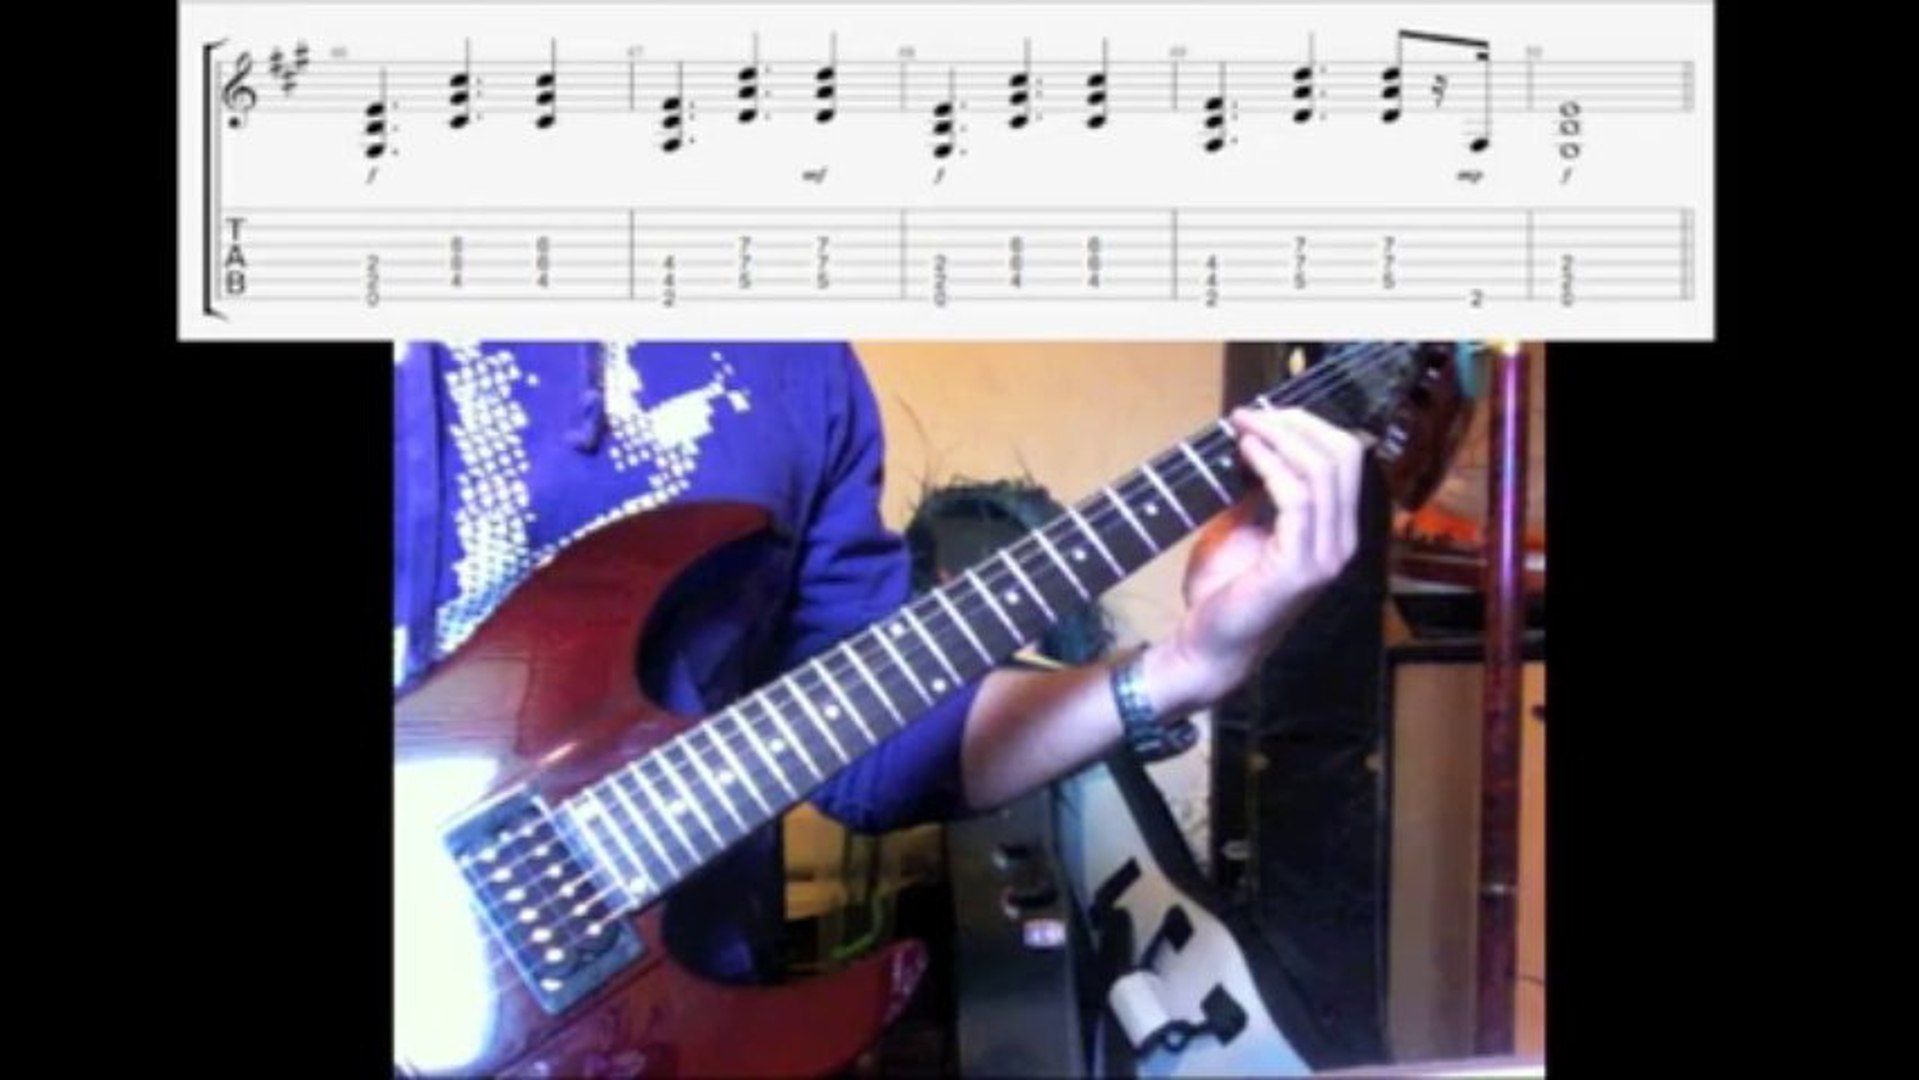 Evanescence - My immortal - solo guitar cover with tablature - Vidéo  Dailymotion